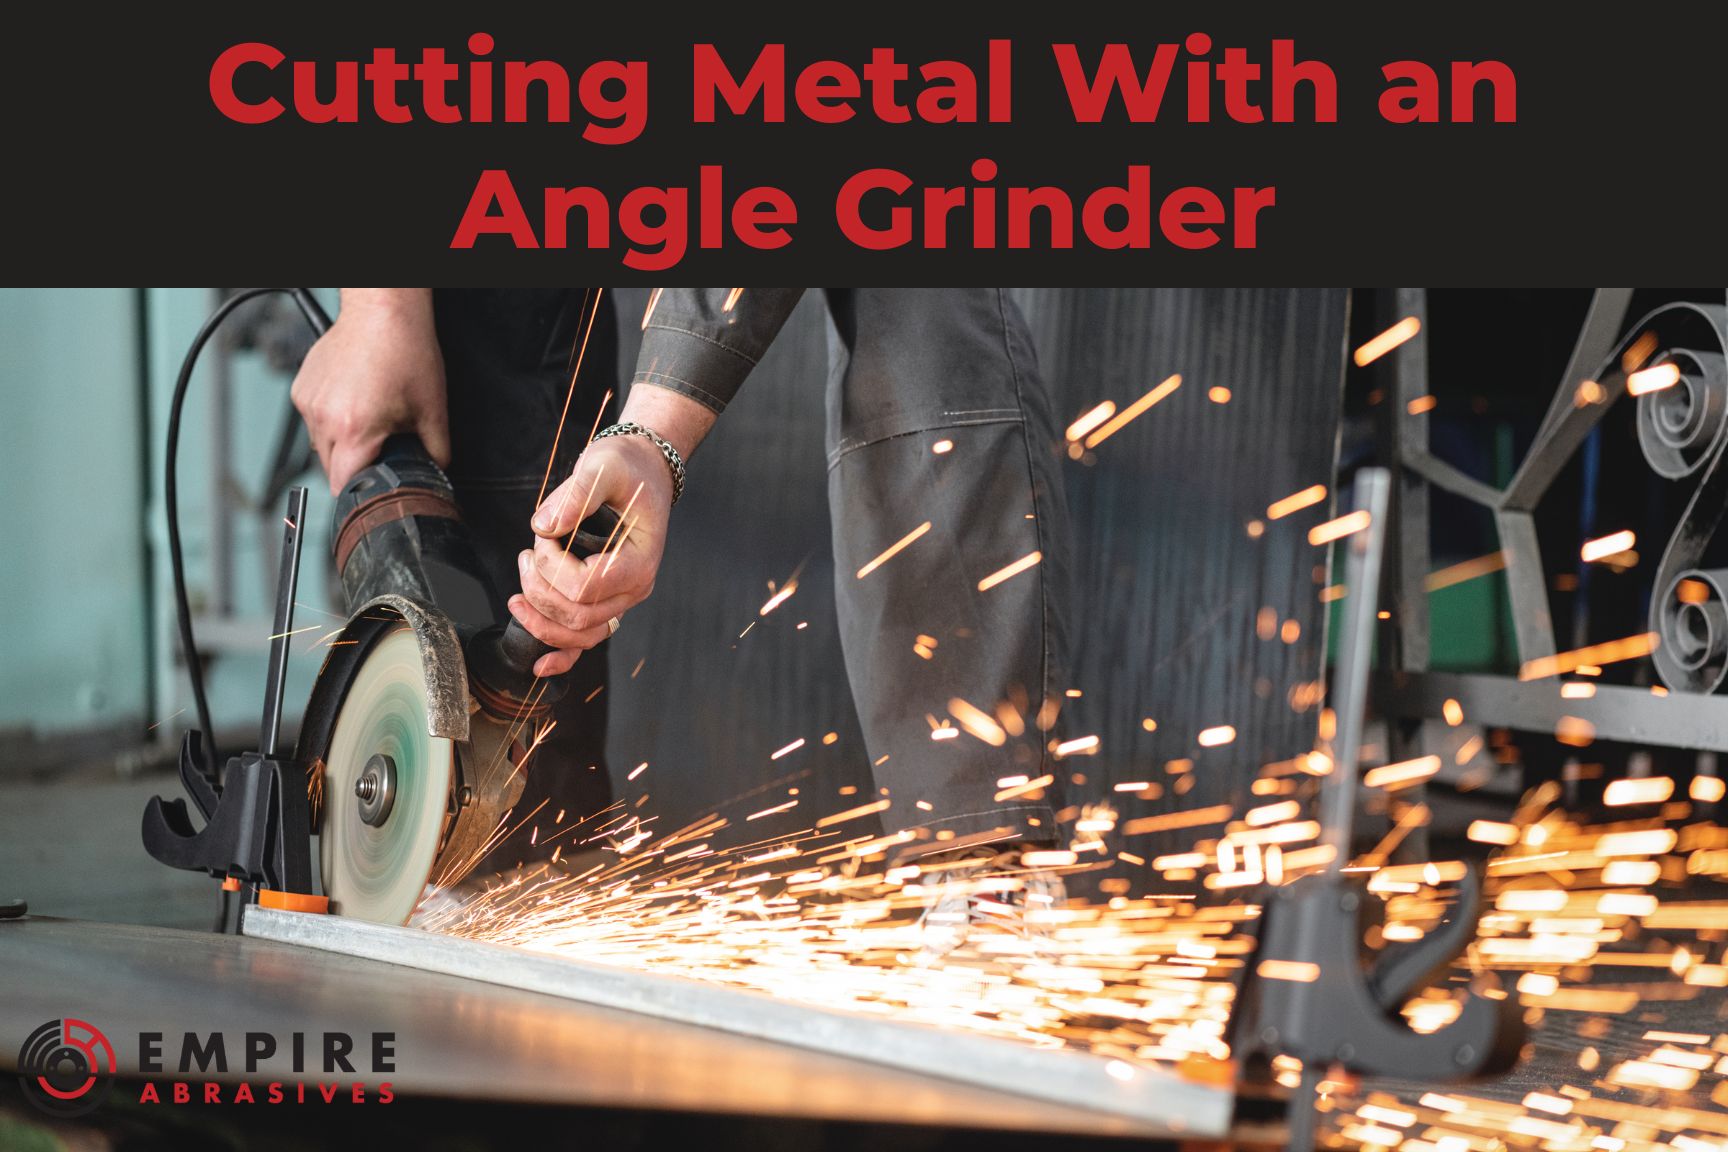 Cutting Metal With an Angle Grinder - Empire Abrasives